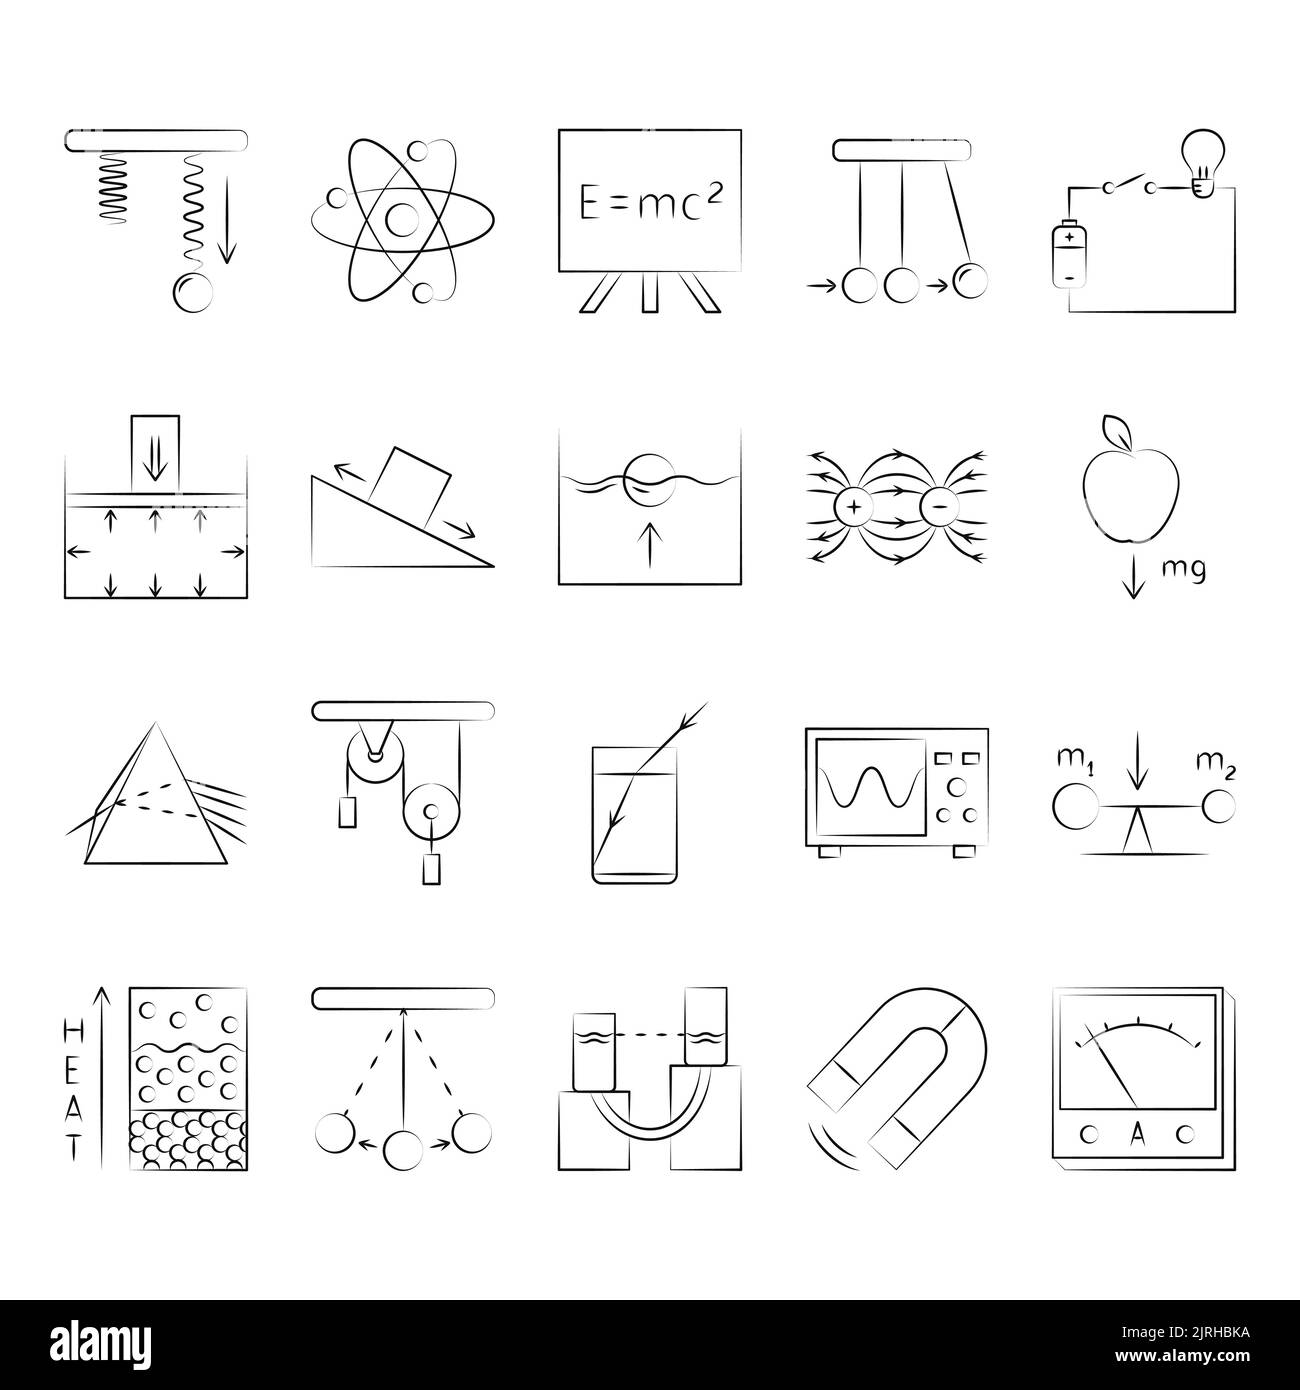 Physics science icon set in sketch style. Physical laws and symbols. Vector illustration Stock Vector